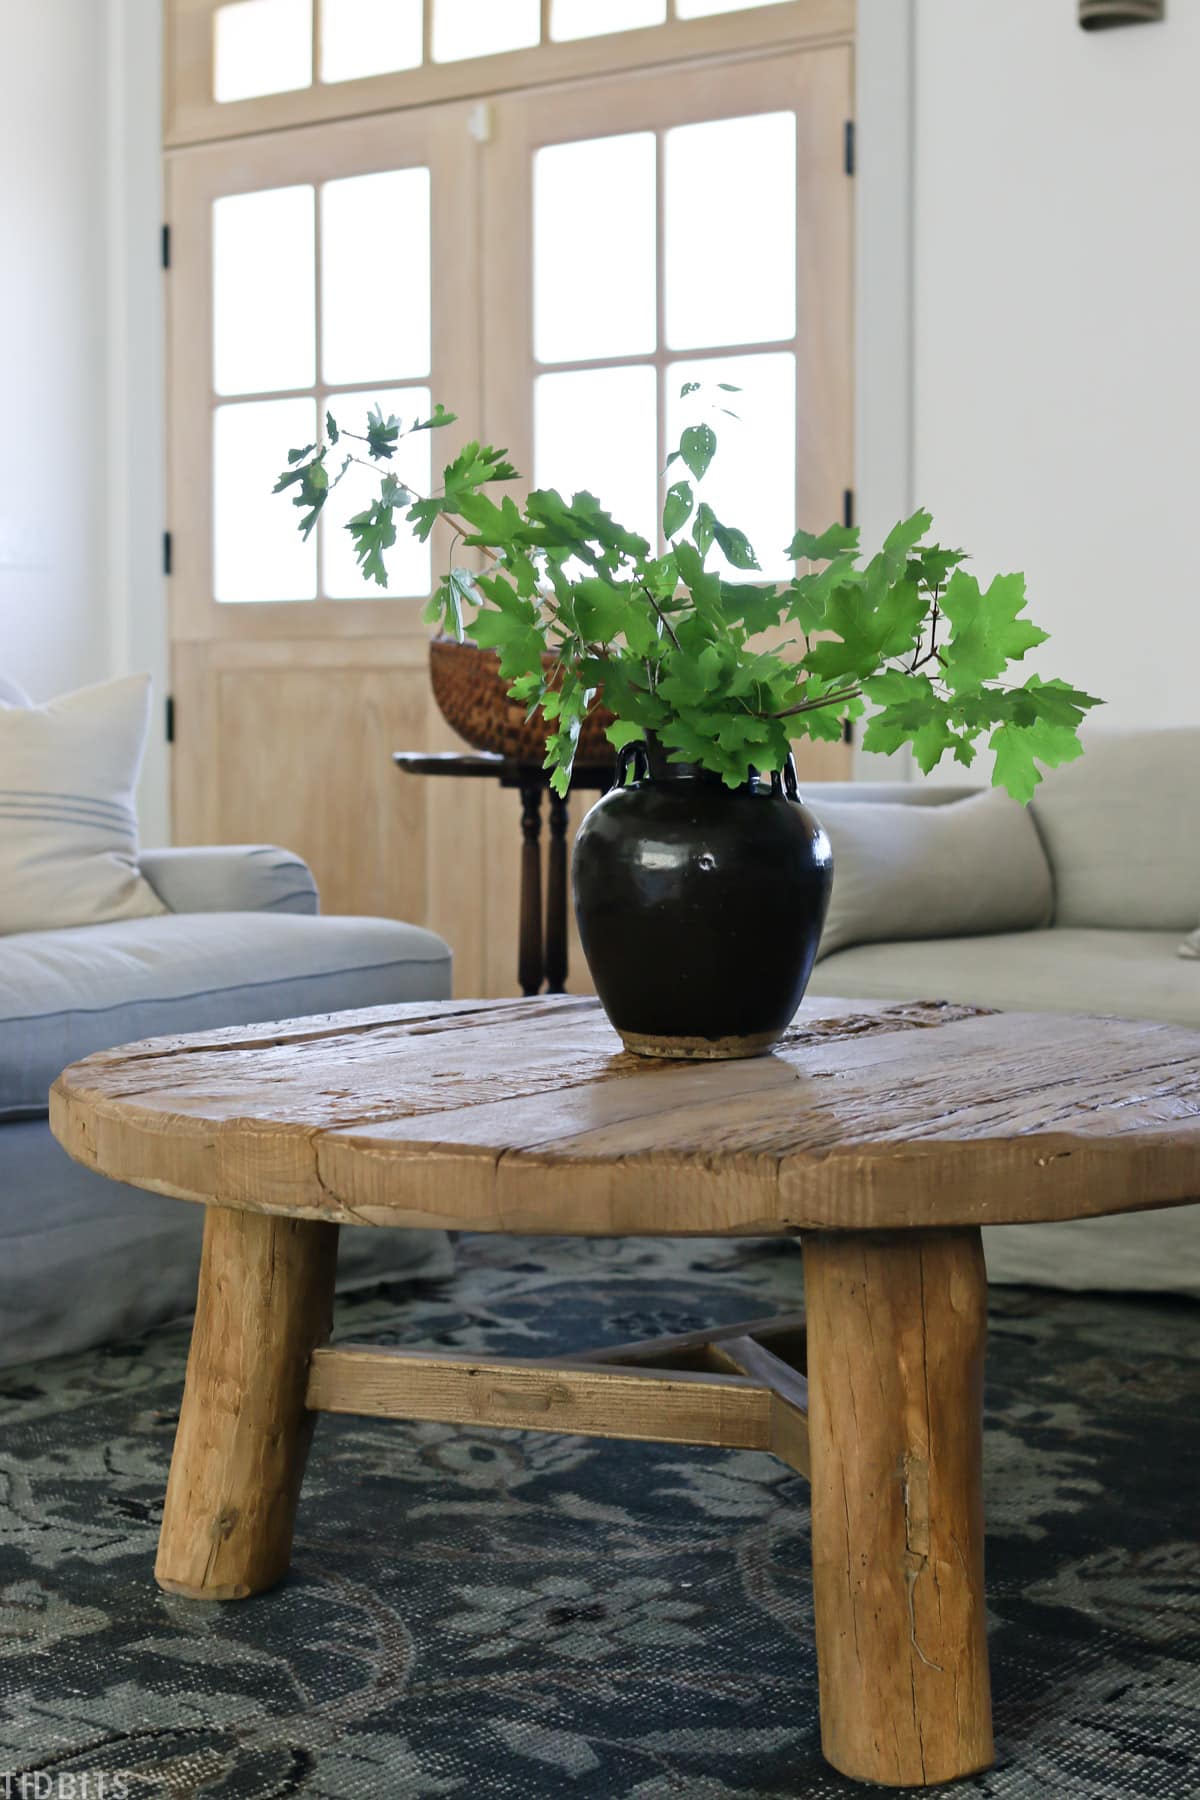 How To Style A Round Coffee Table 3, Round Coffee Table Living Room Design